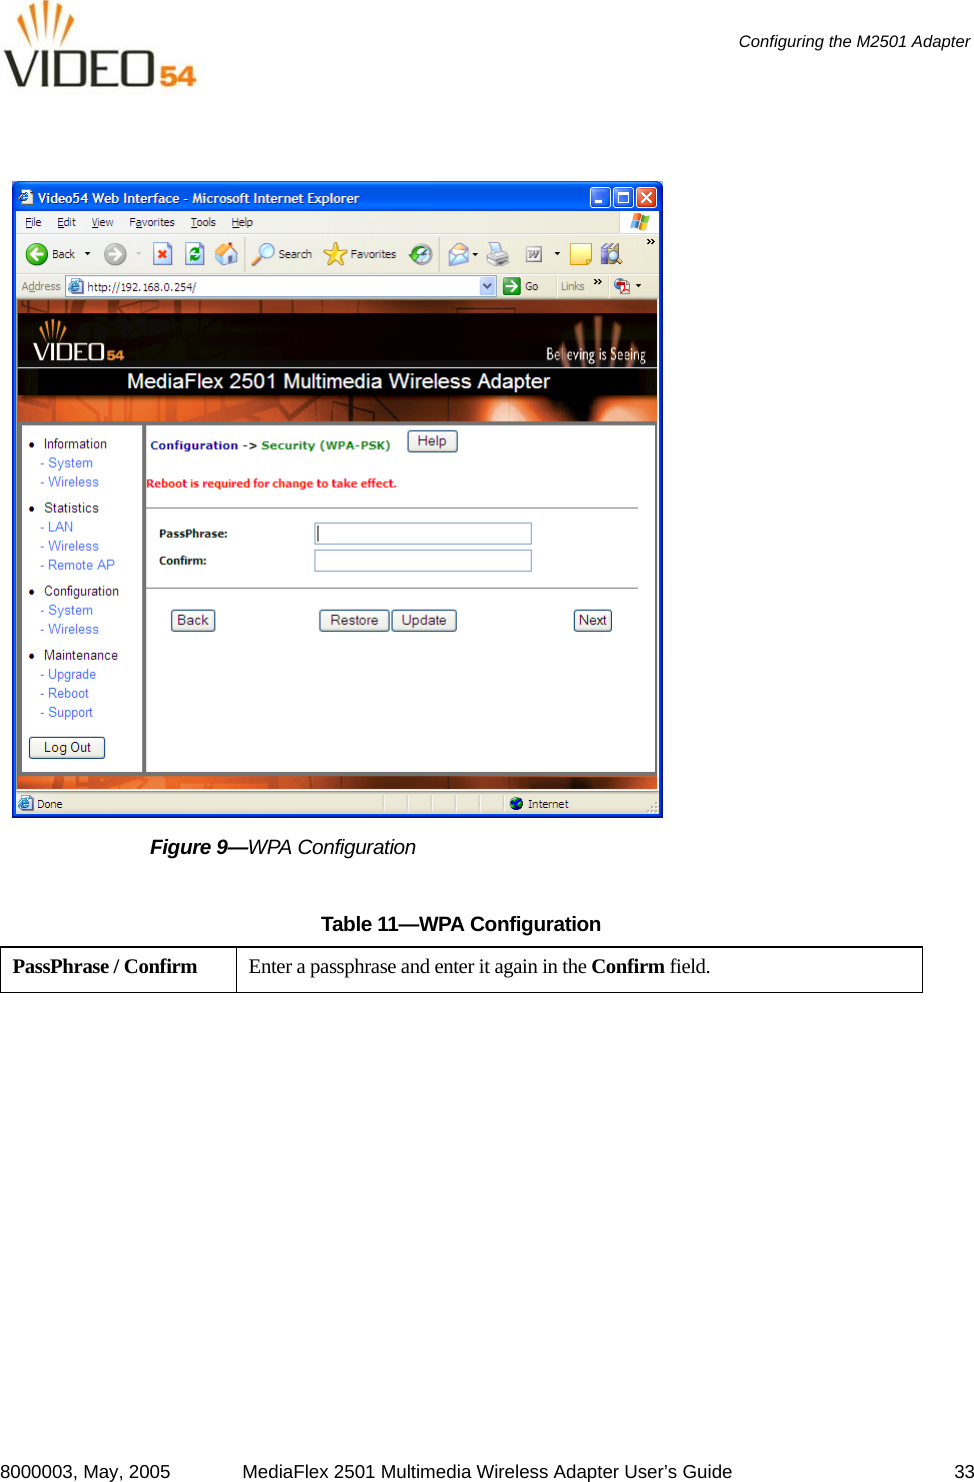 8000003, May, 2005 MediaFlex 2501 Multimedia Wireless Adapter User’s Guide 33Configuring the M2501 Adapter Figure 9—WPA ConfigurationTable 11—WPA ConfigurationPassPhrase / Confirm Enter a passphrase and enter it again in the Confirm field. 